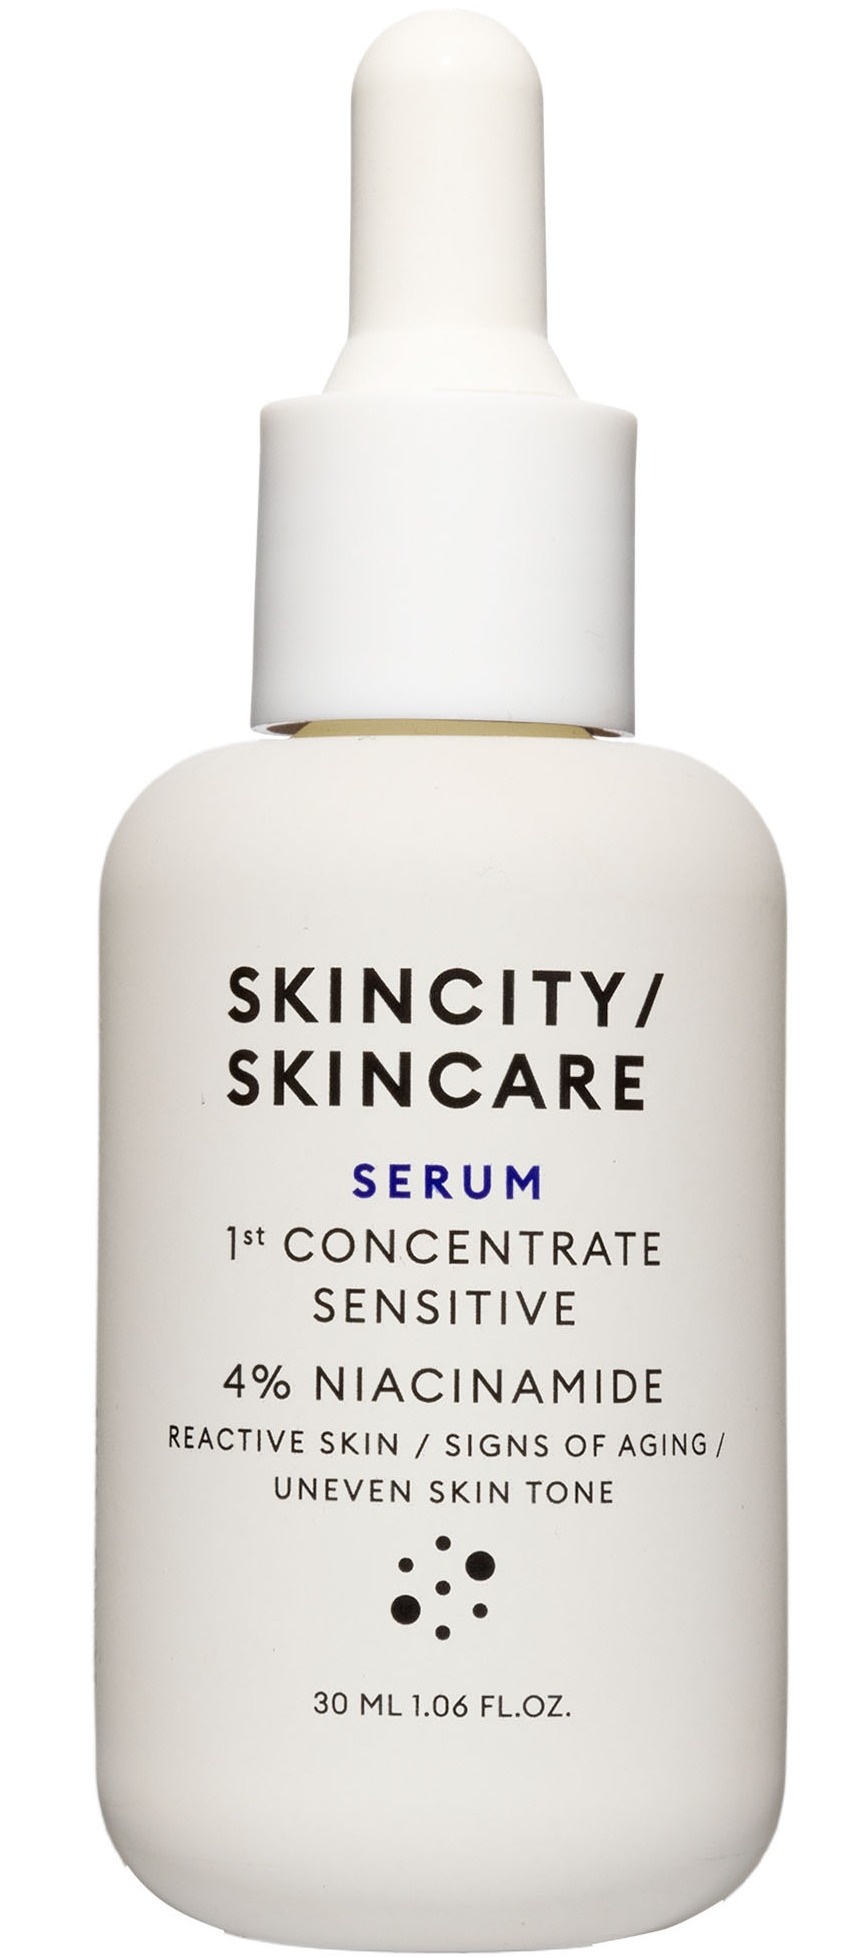 skincity skincare First Concentrate Sensitive